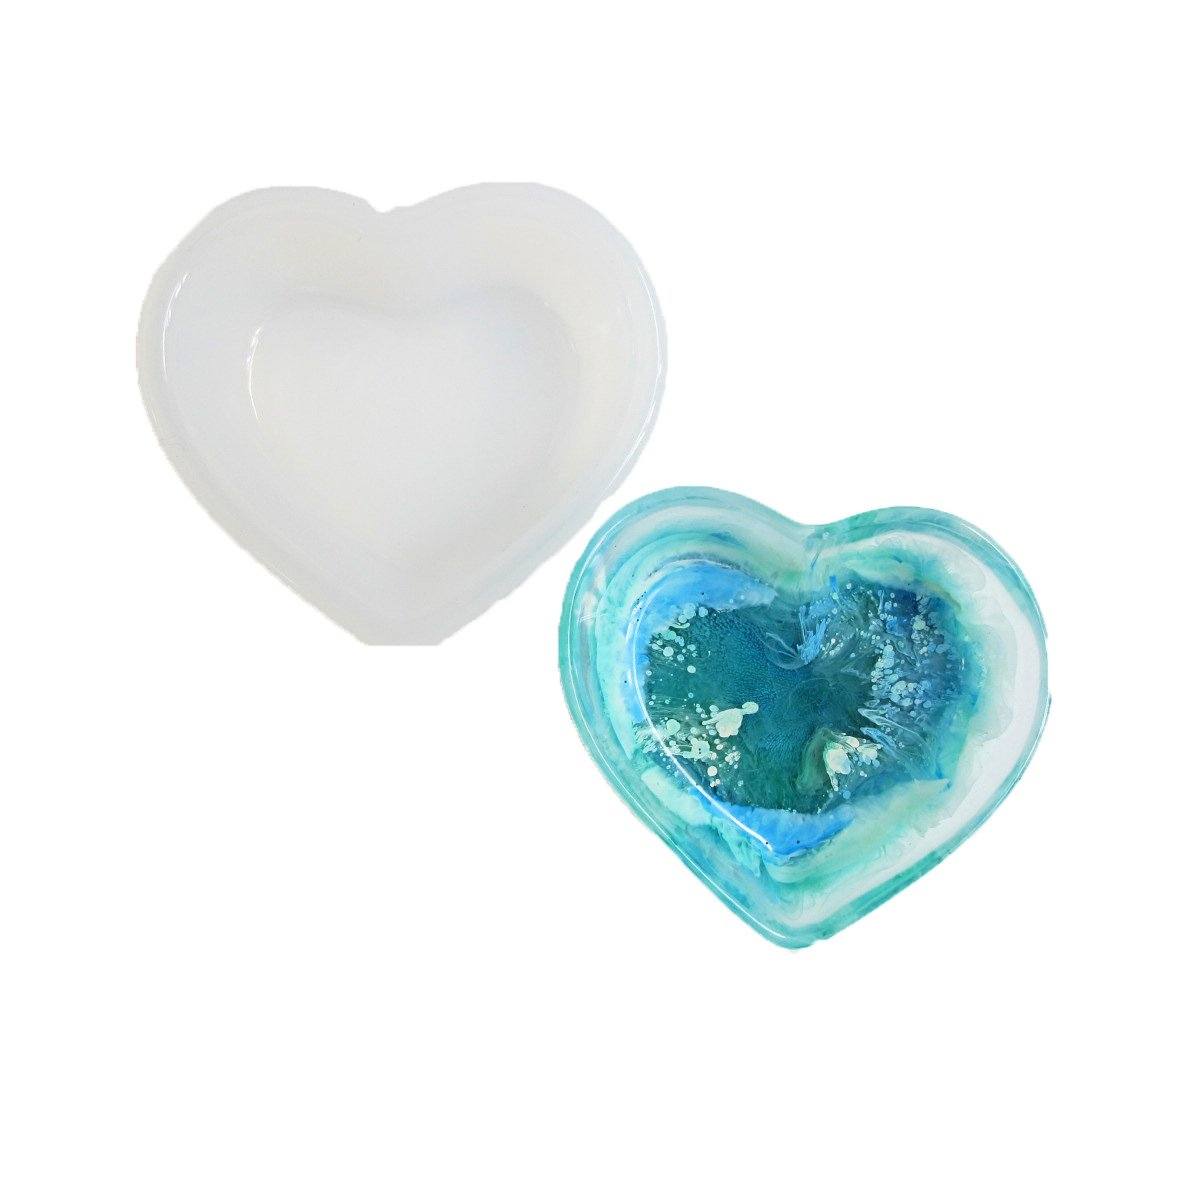 3D Square Soap Moulds Love Heart Design Silicone Mold DIY Silicone Mold for  Soap Making 